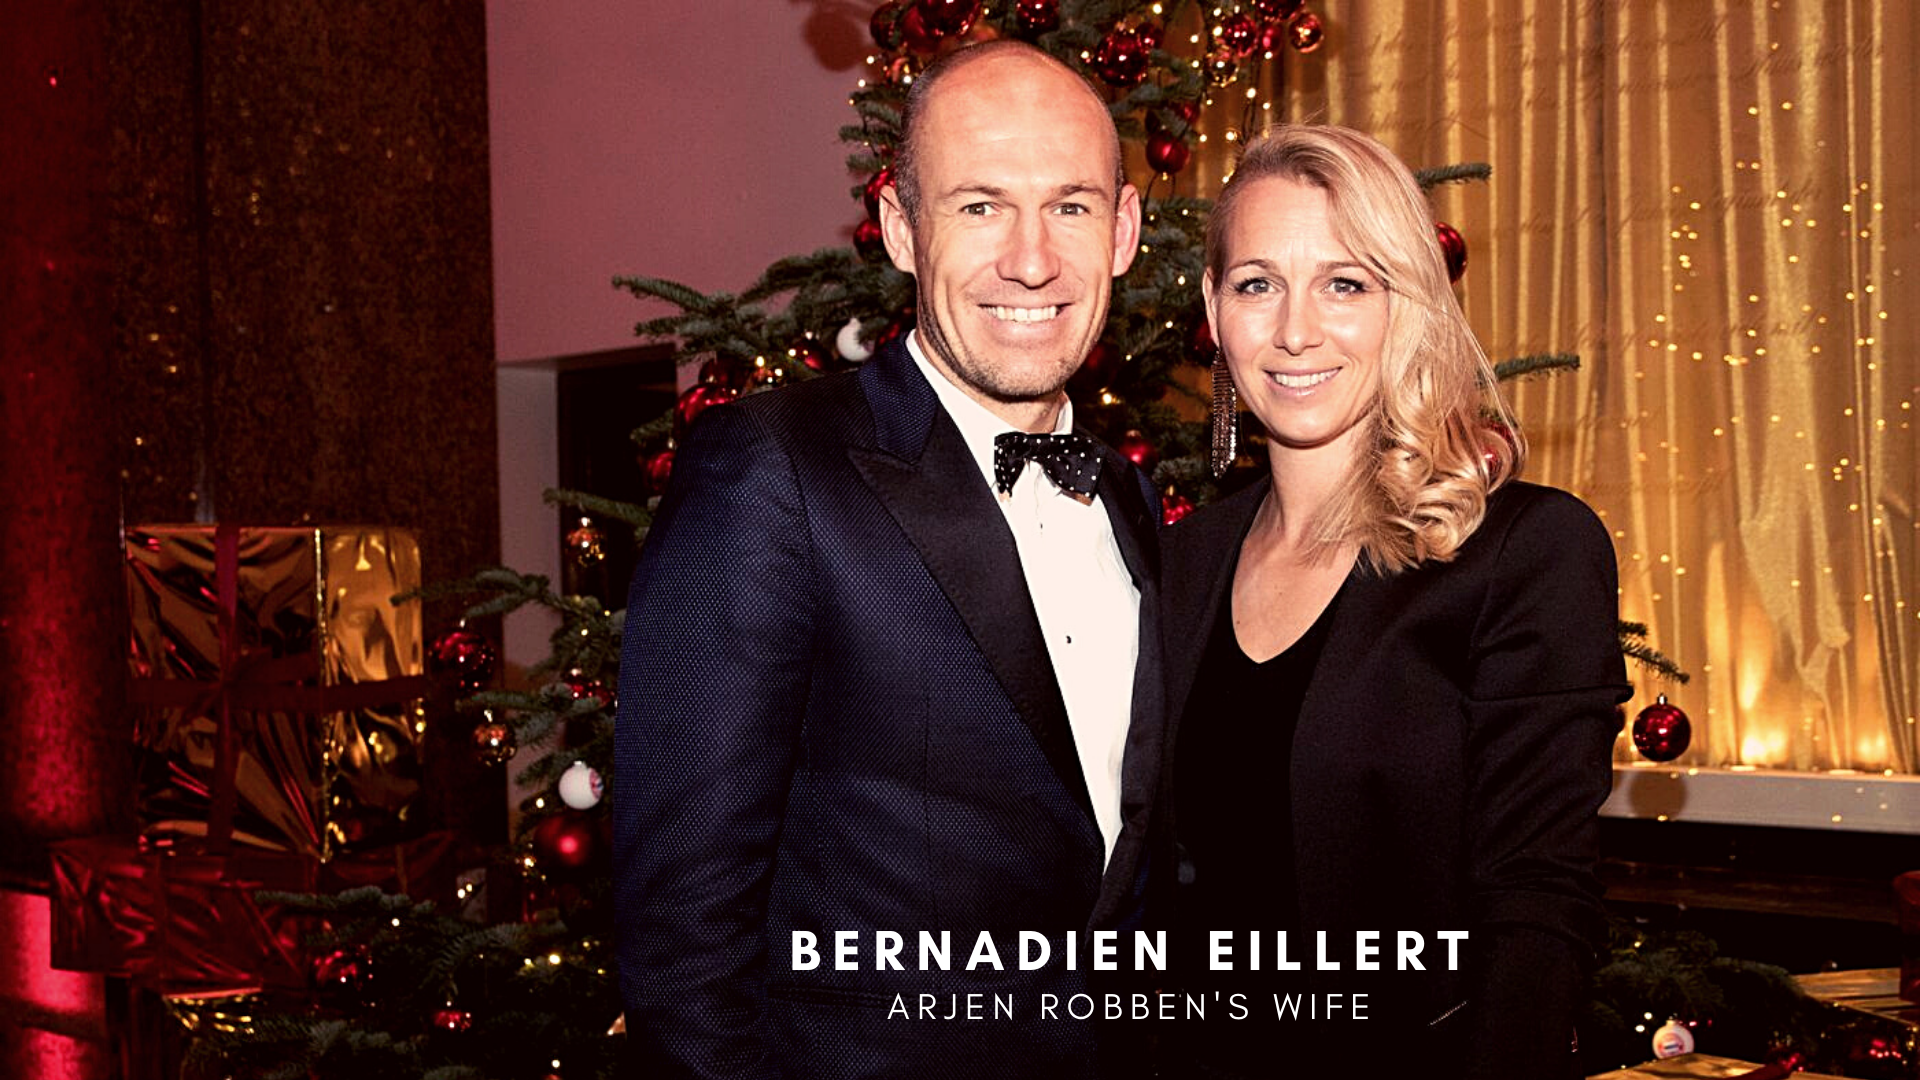 Arjen Robben with his wife Bernadien Eillert. (Photo by A. Grimm/FC Bayern via Getty Images)